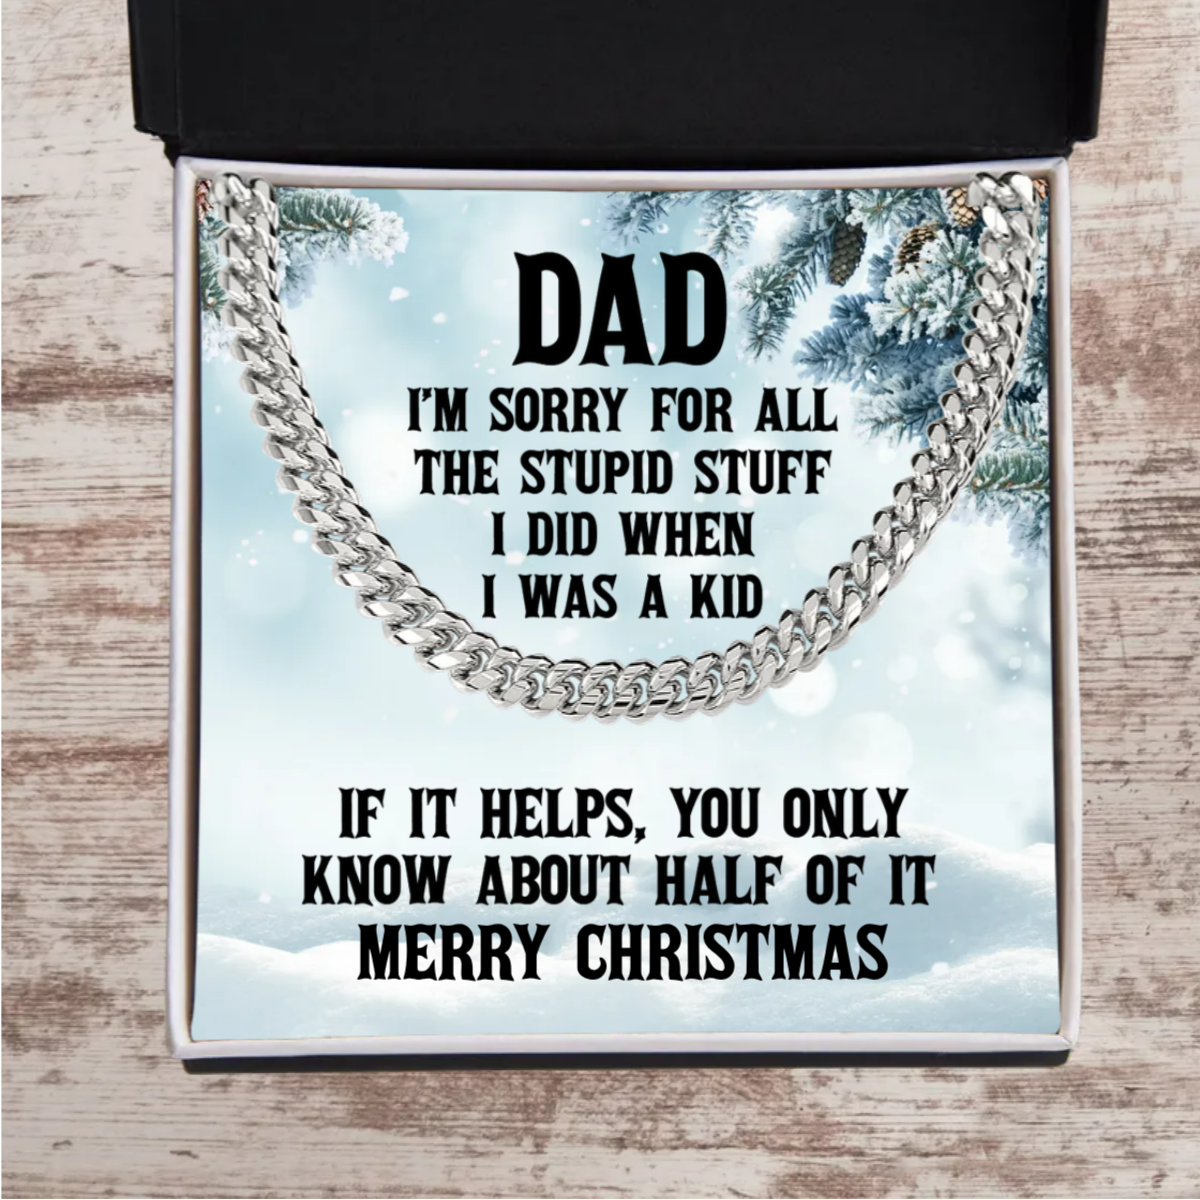 Funny Personalized Birthday, Father's Day, Christmas Holiday Gift for Dad Cuban Chain Link Necklace - Sorry Dad for All the Stupid Stuff